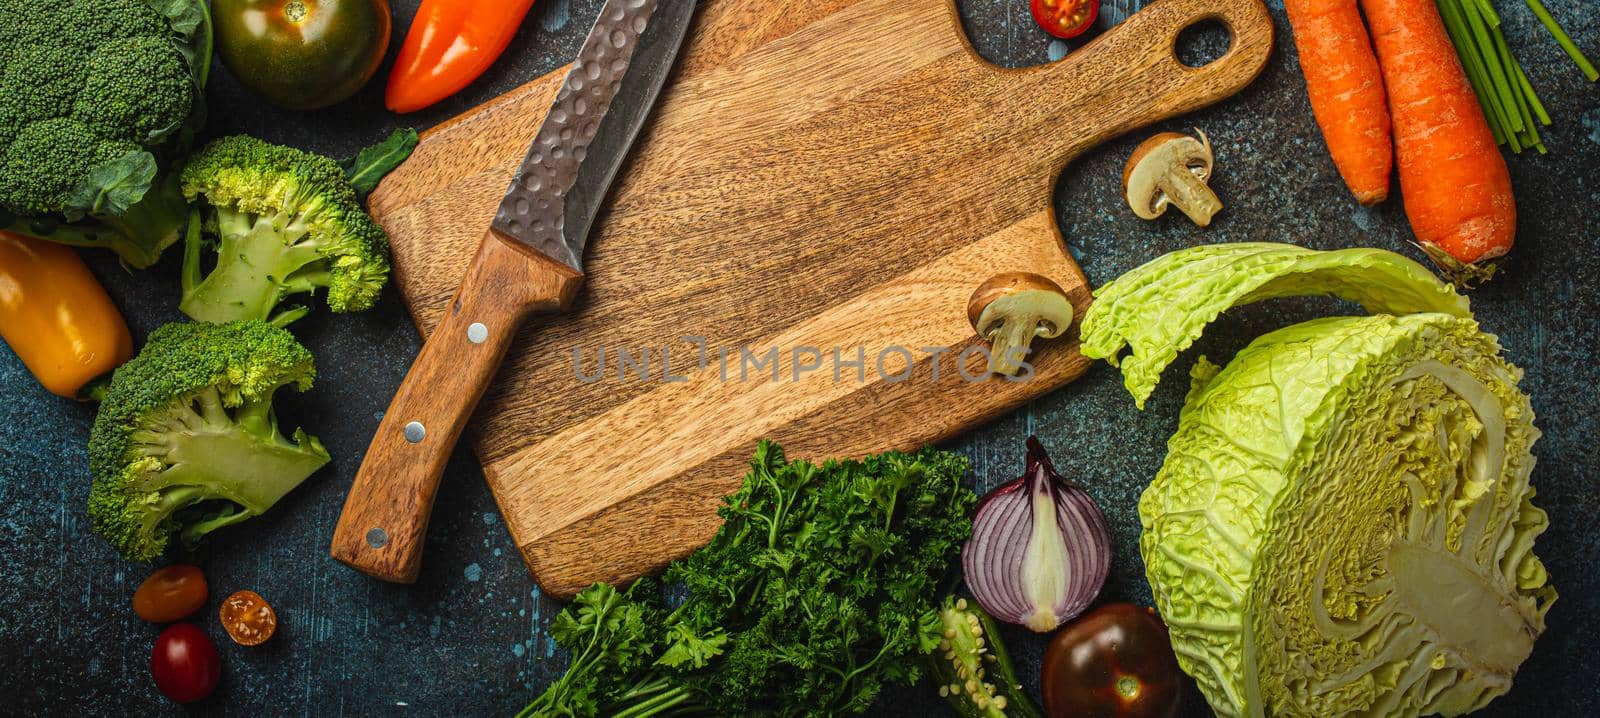 Assorted fresh vegetables on rustic concrete table with wooden cutting board in center and kitchen knife, diet and vegetarian food preparing and meal cooking concept, healthy lifestyle